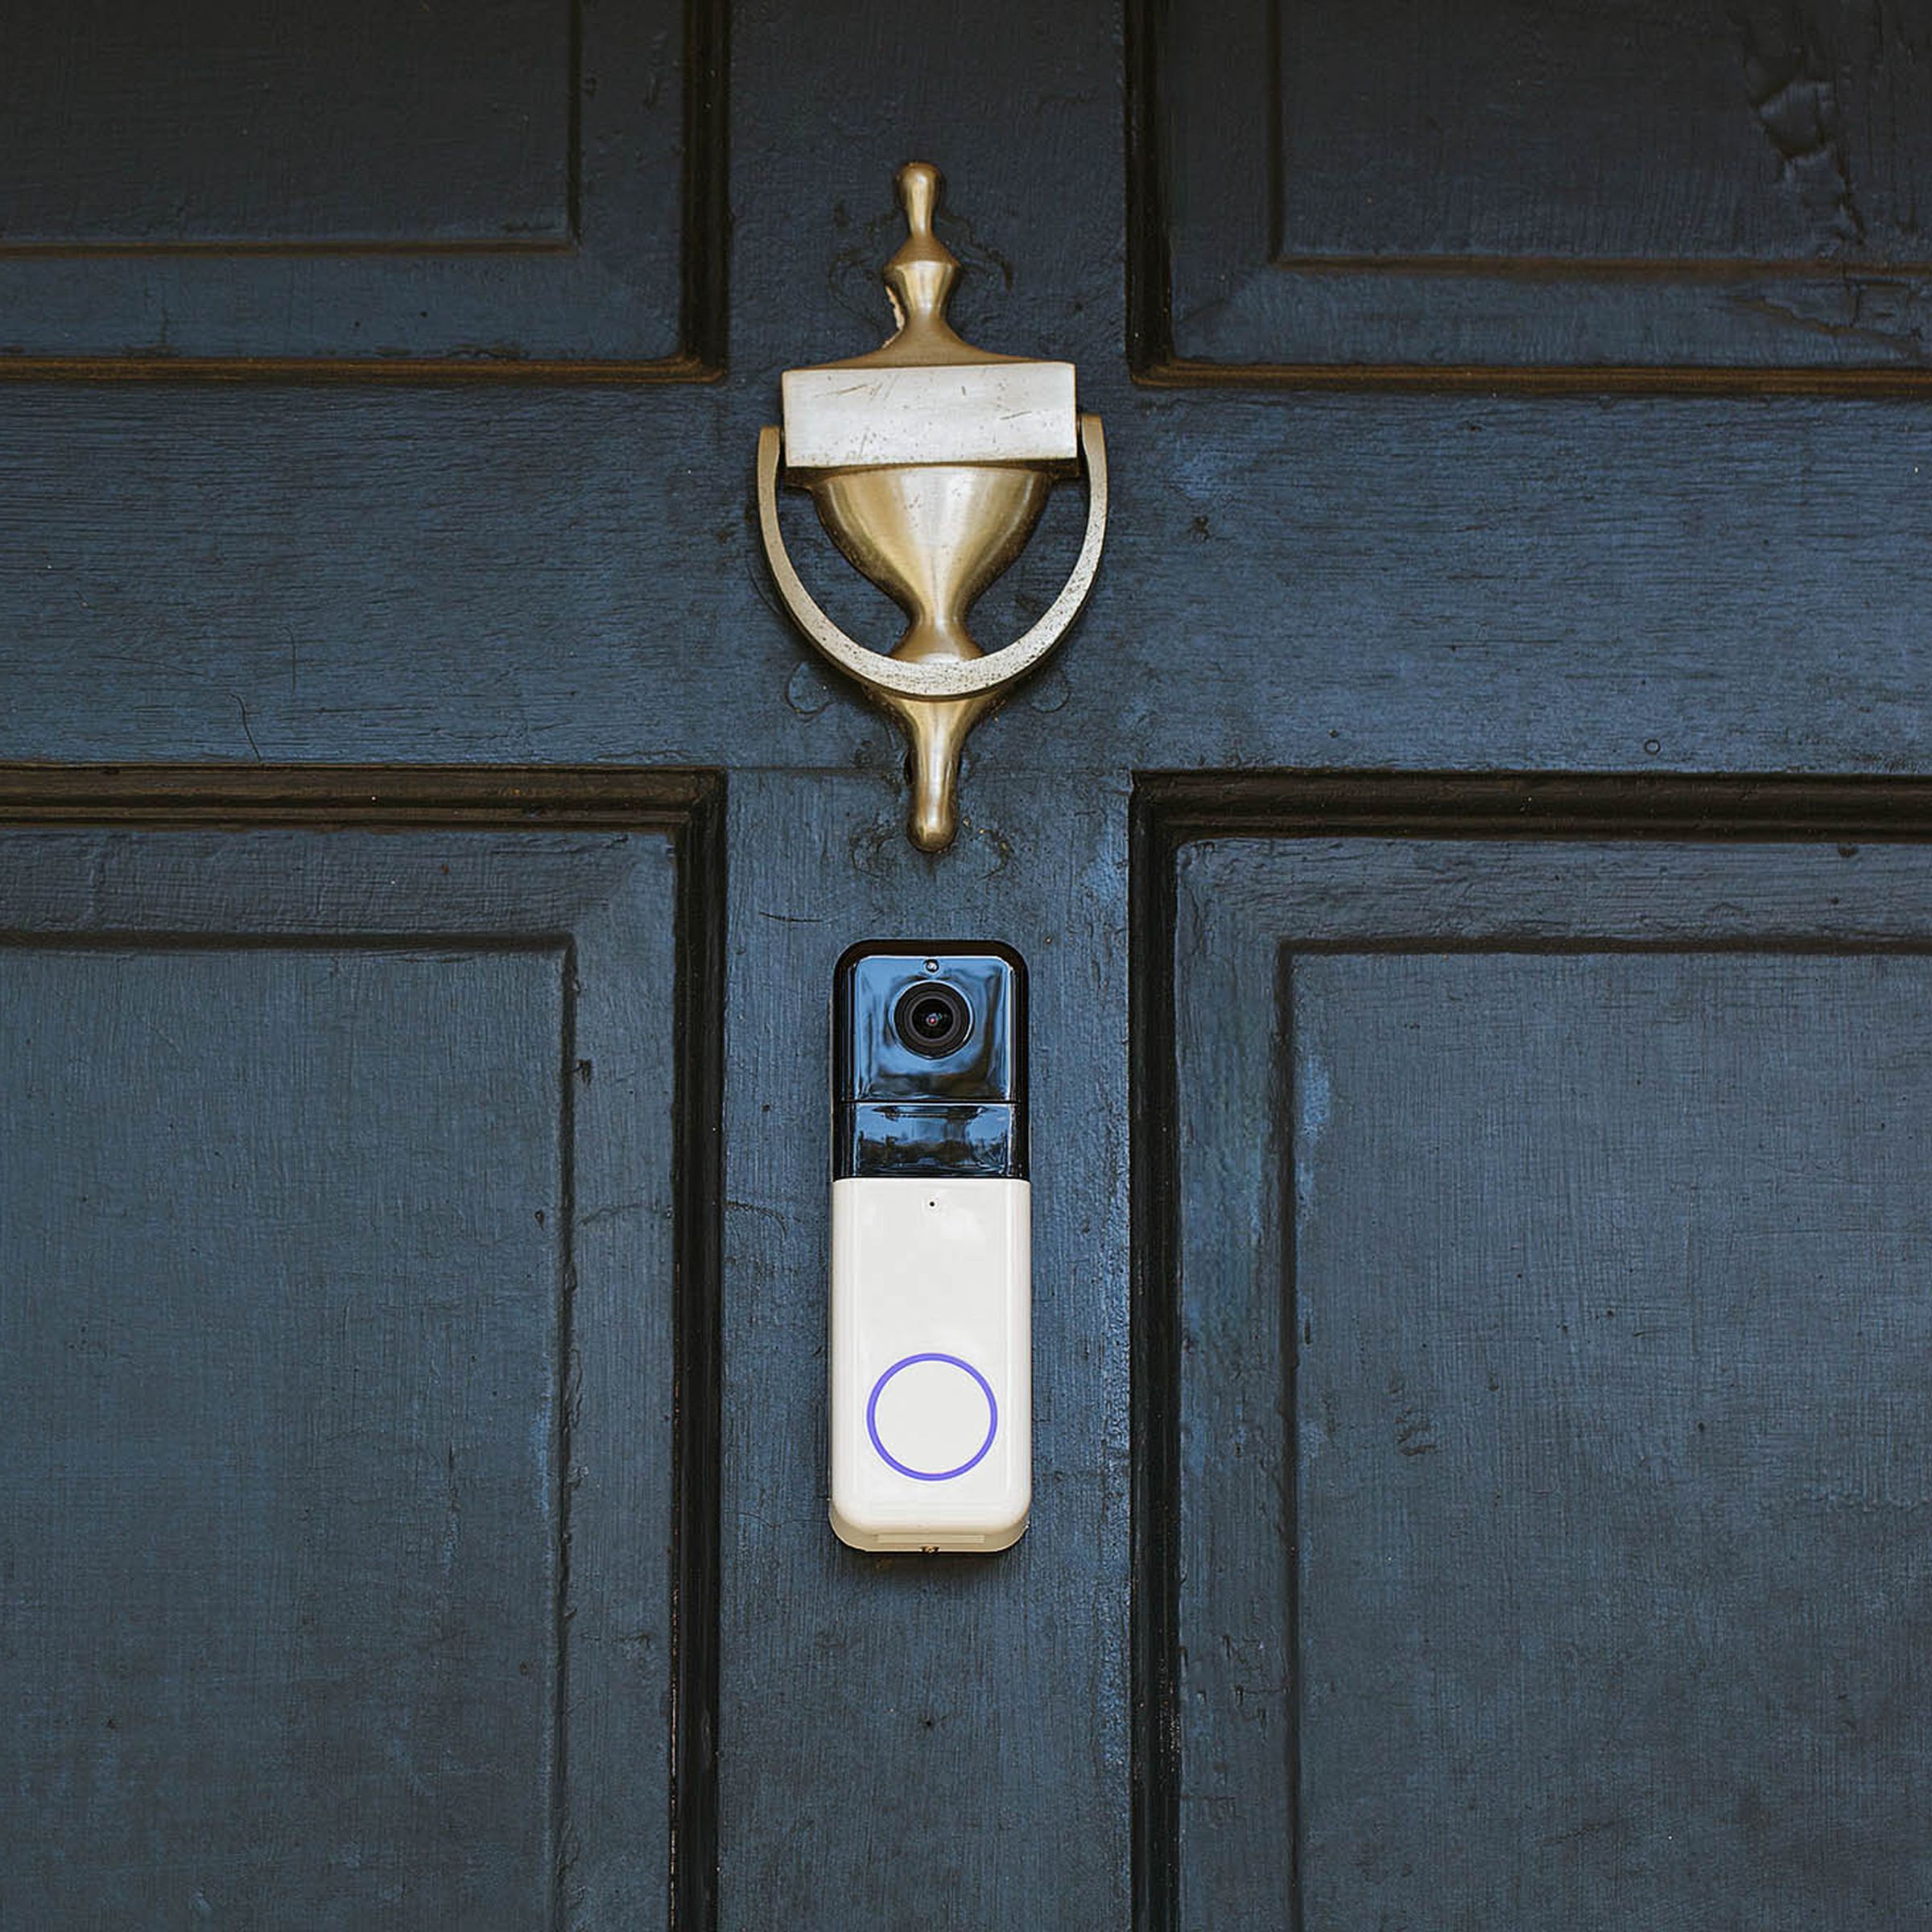 The Wyze Video Doorbell Pro is a doorbell camera that can be battery-powered or wired to existing doorbell wiring.